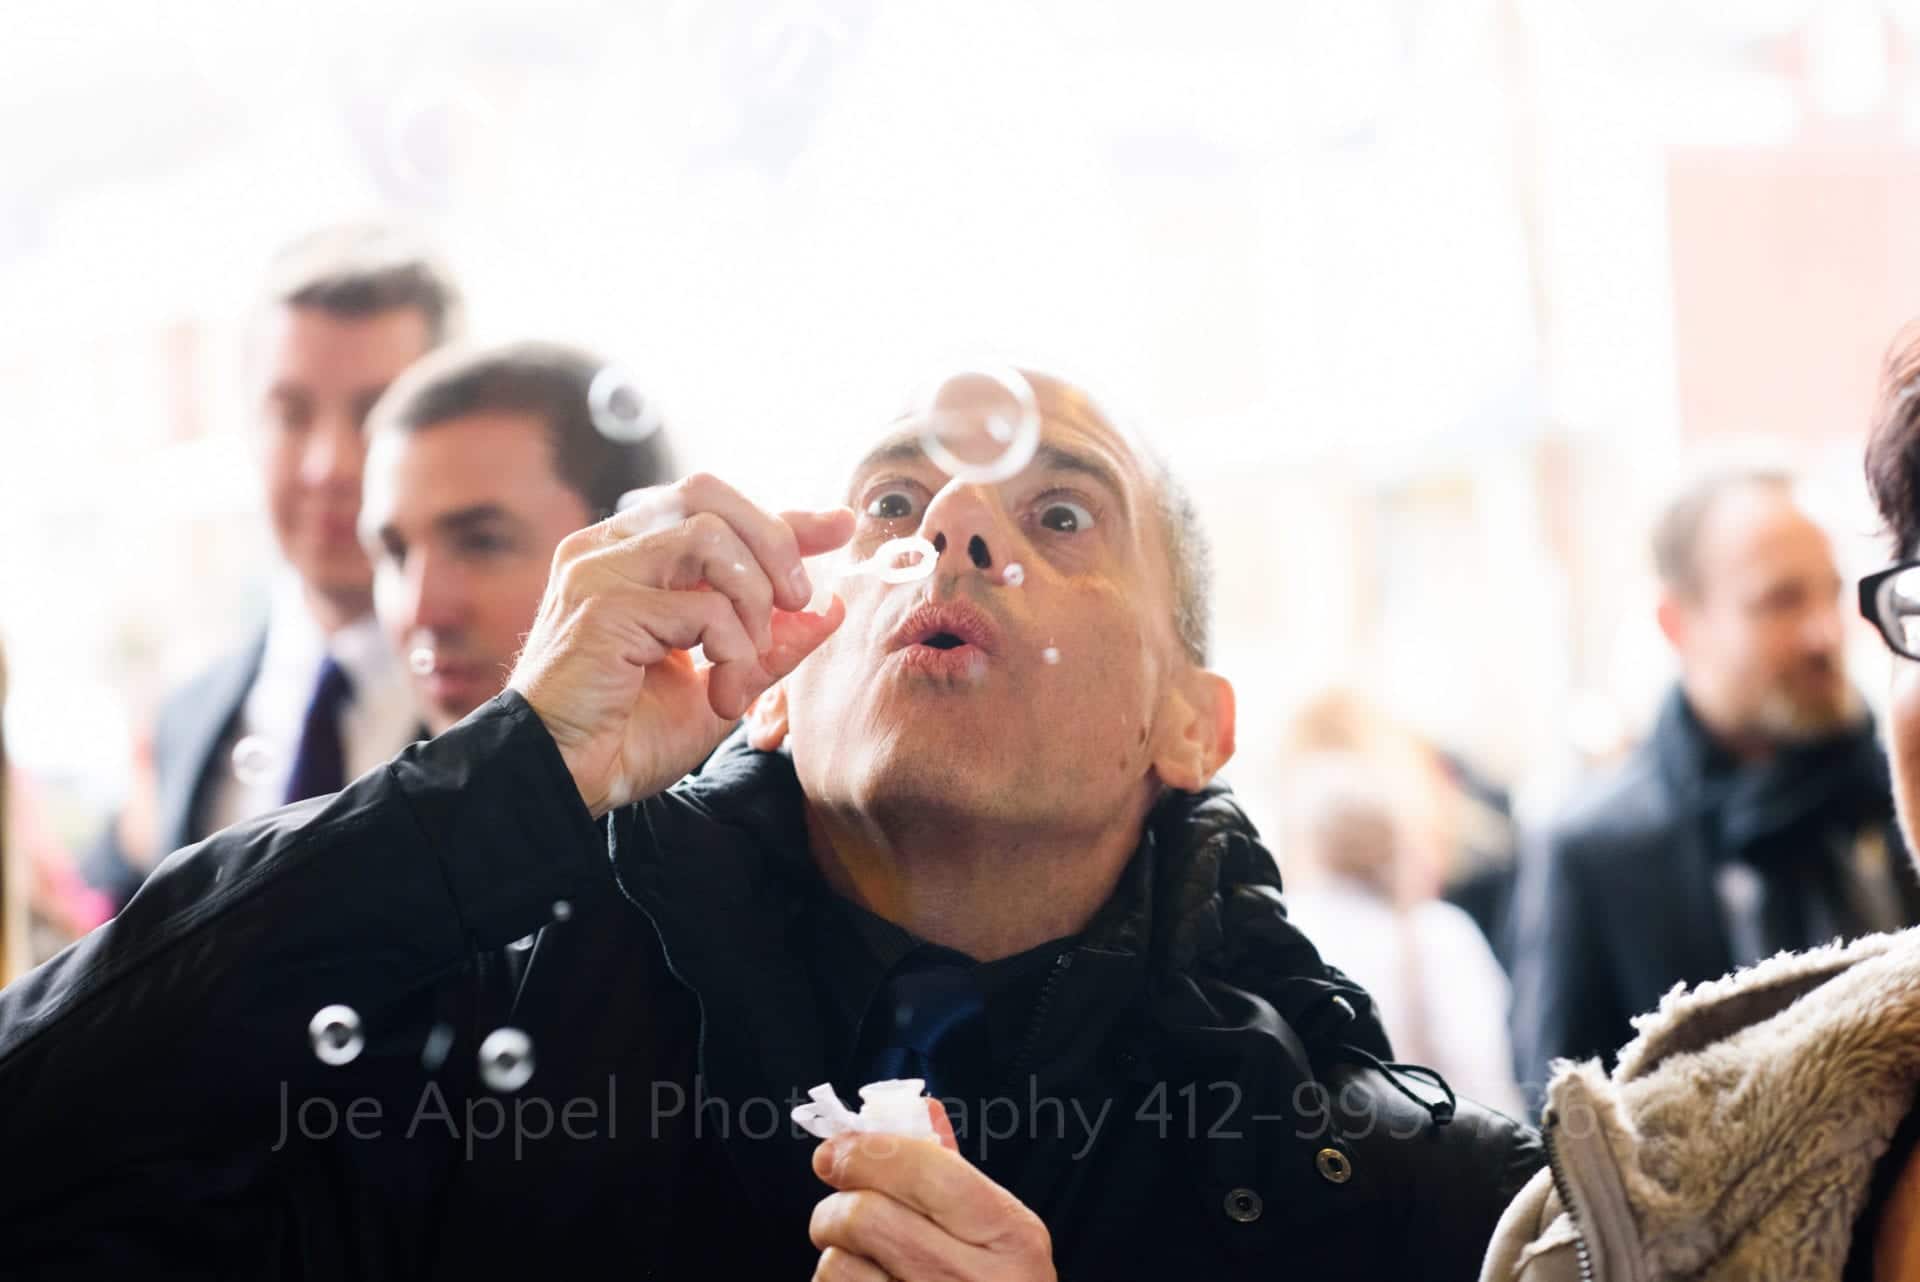 A man's eyes open wide as he focuses on the bubble he's blowing at the end of a wedding.